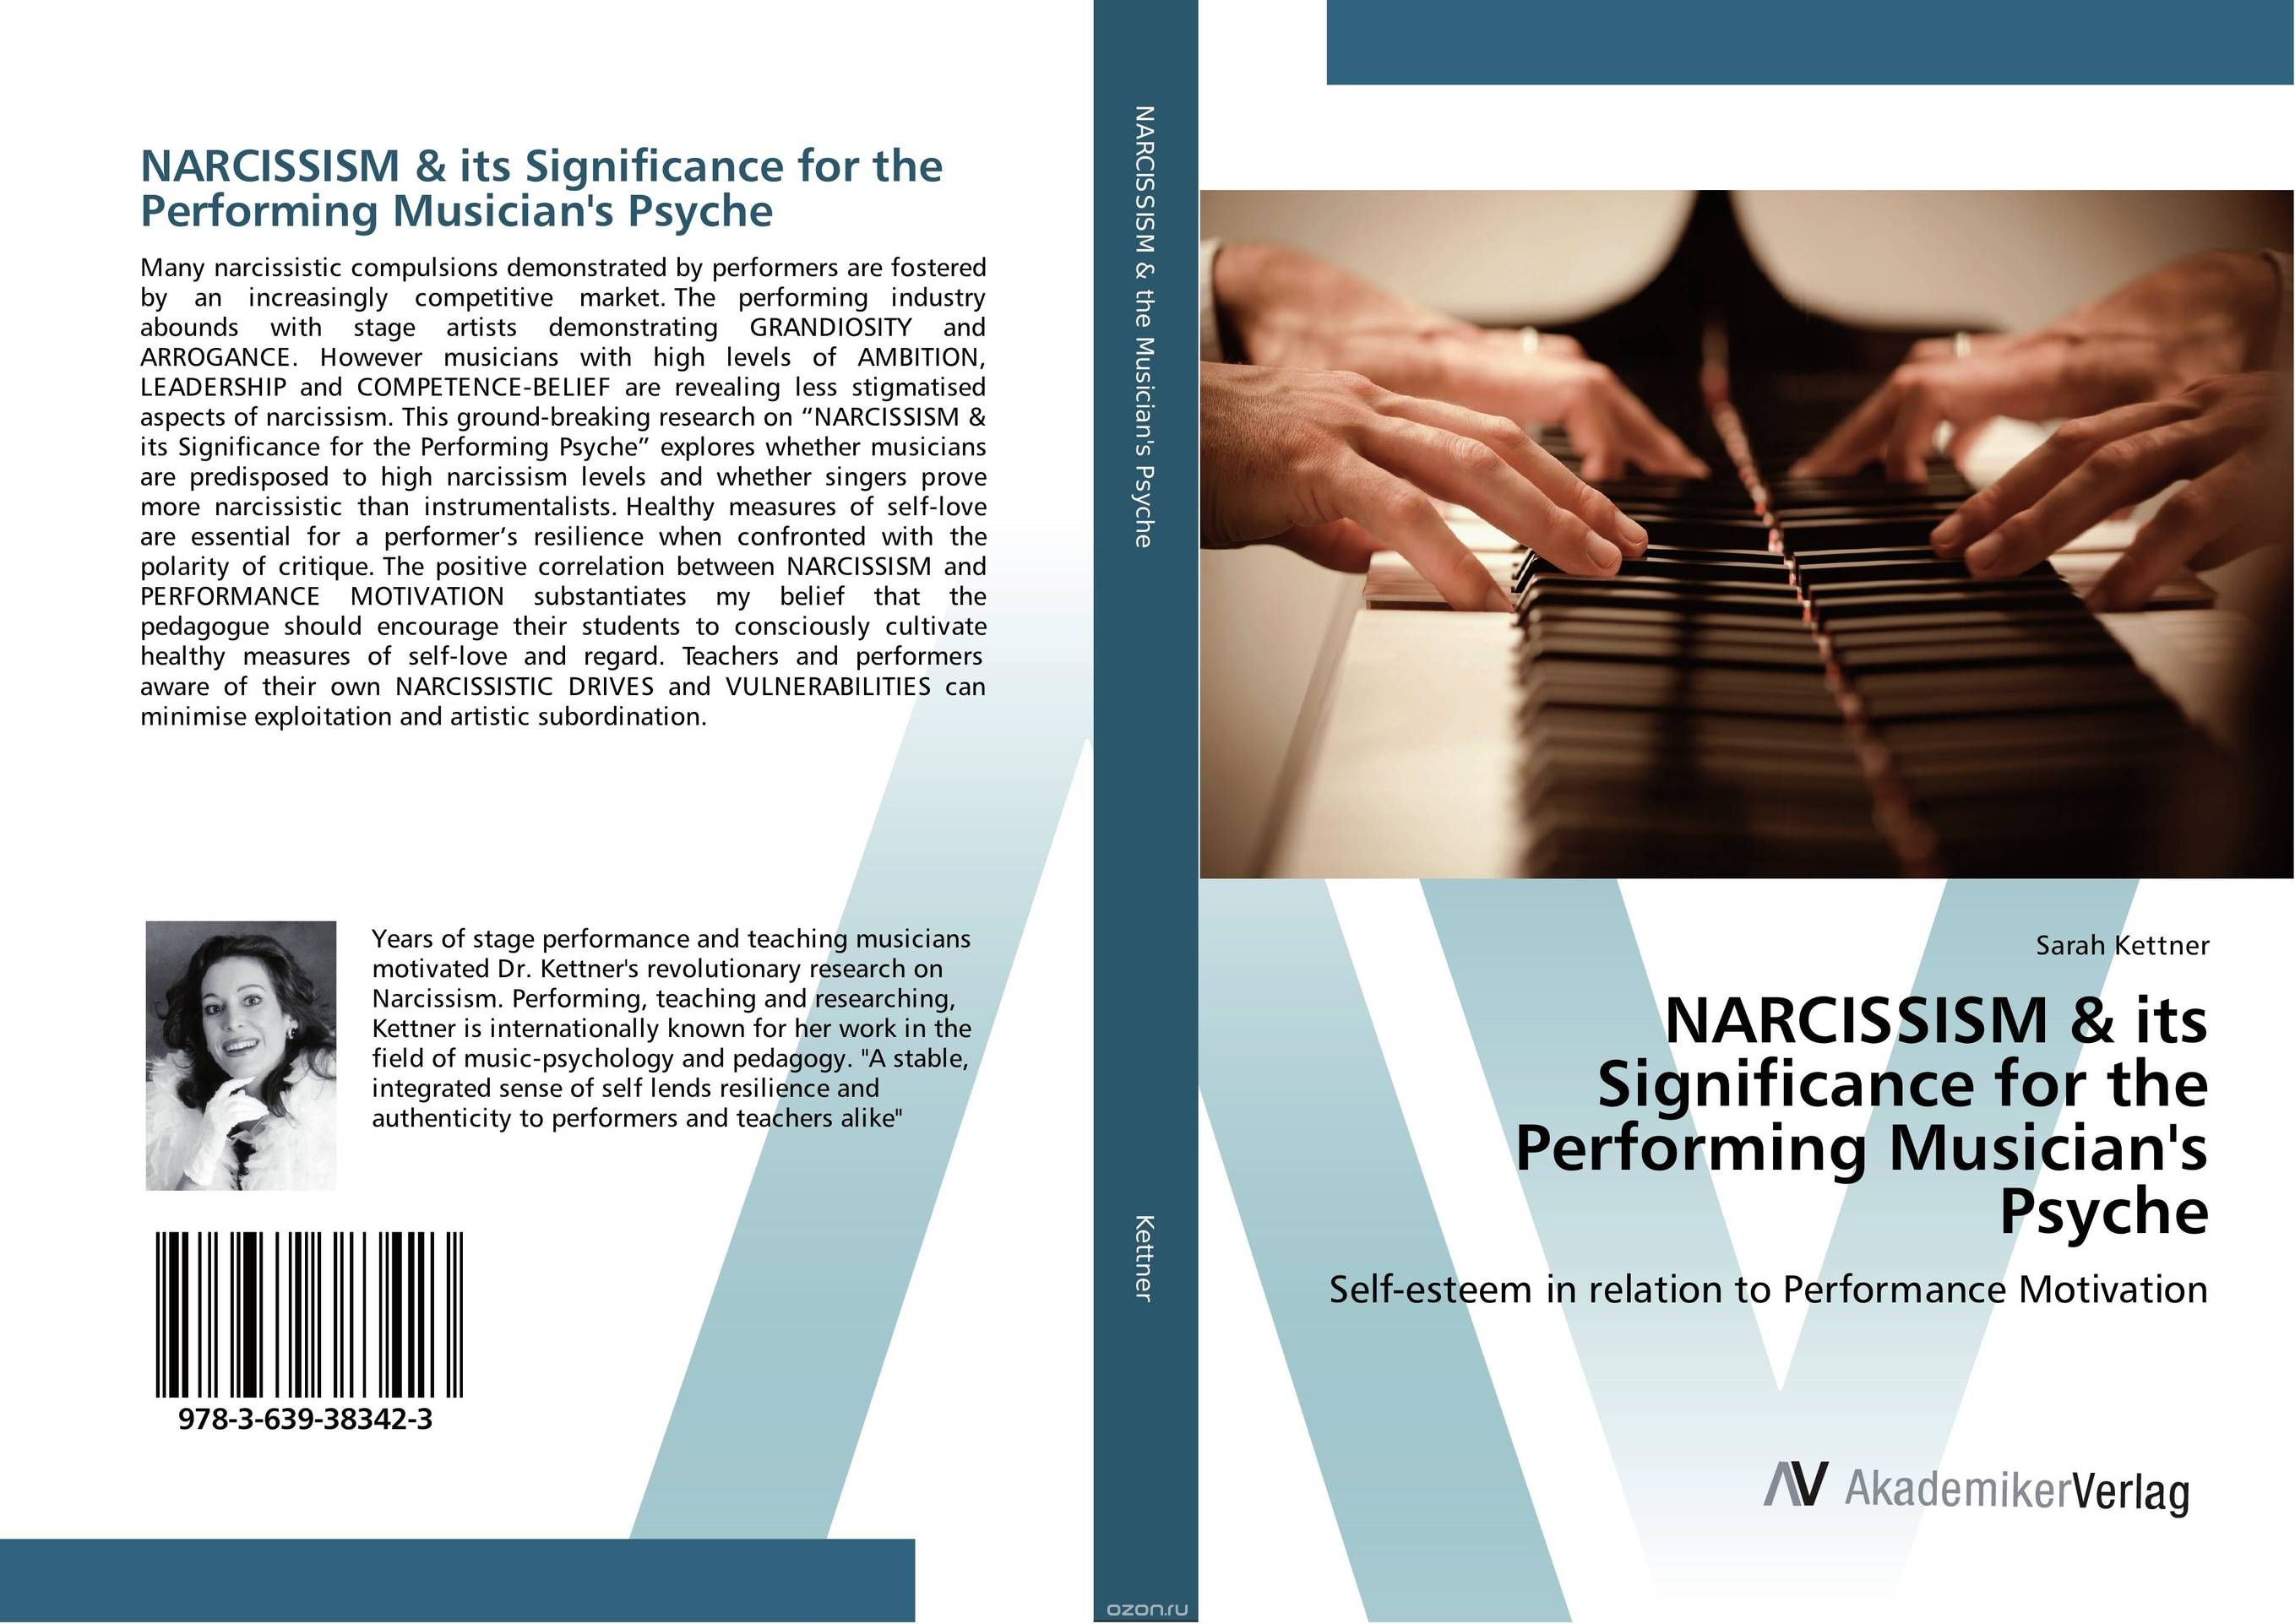 Скачать книгу "NARCISSISM & its Significance for the Performing Musician's Psyche"